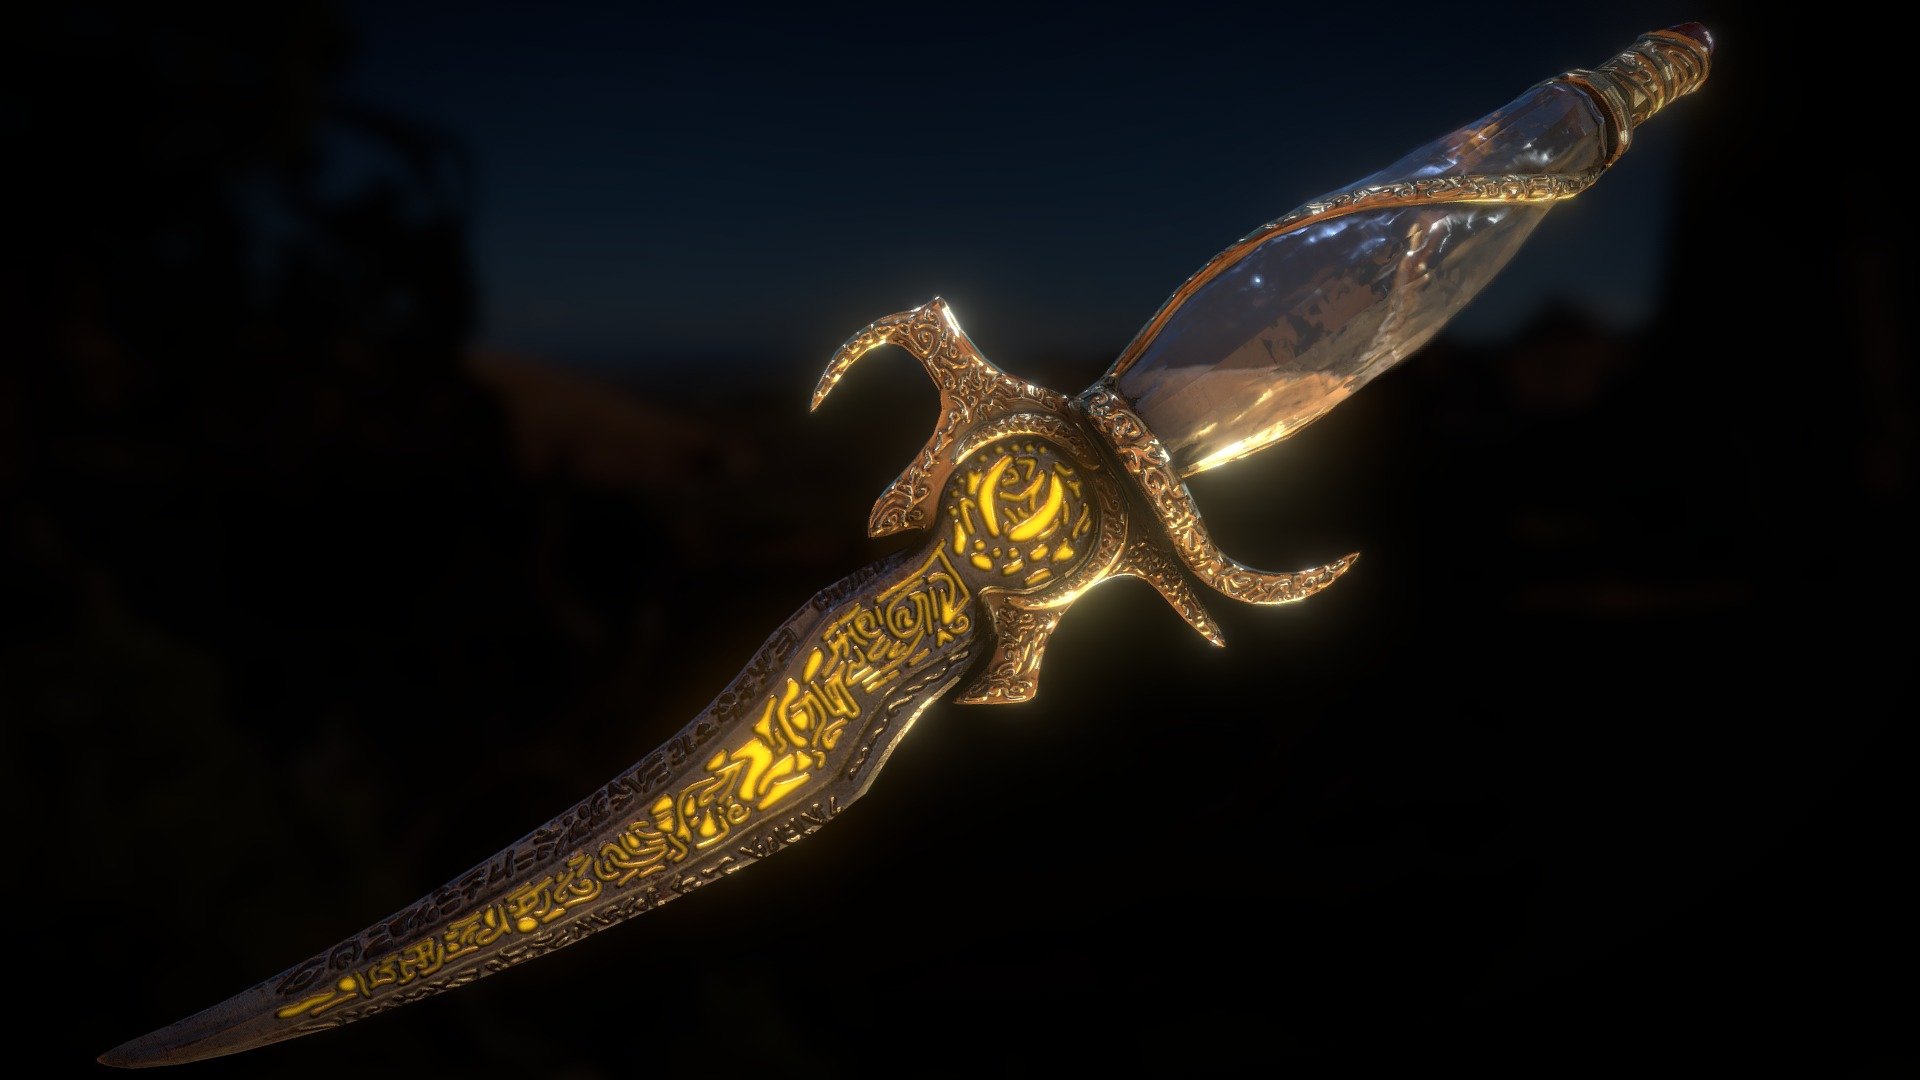 More than a weapon, the Dagger of Time is the only container besides the Hourglass that is strong enough to hold the Sands of Time. Whoever wields the Dagger is granted the power to control Time, by using up the Sands within.

Programms: Zbrush, 3dsMax, Marmoset Toolbag 4, Substance Painter - The Dagger of Time - Prince of Persia(lowpoly) - 3D model by DeLeon (@dele0n) 3d model